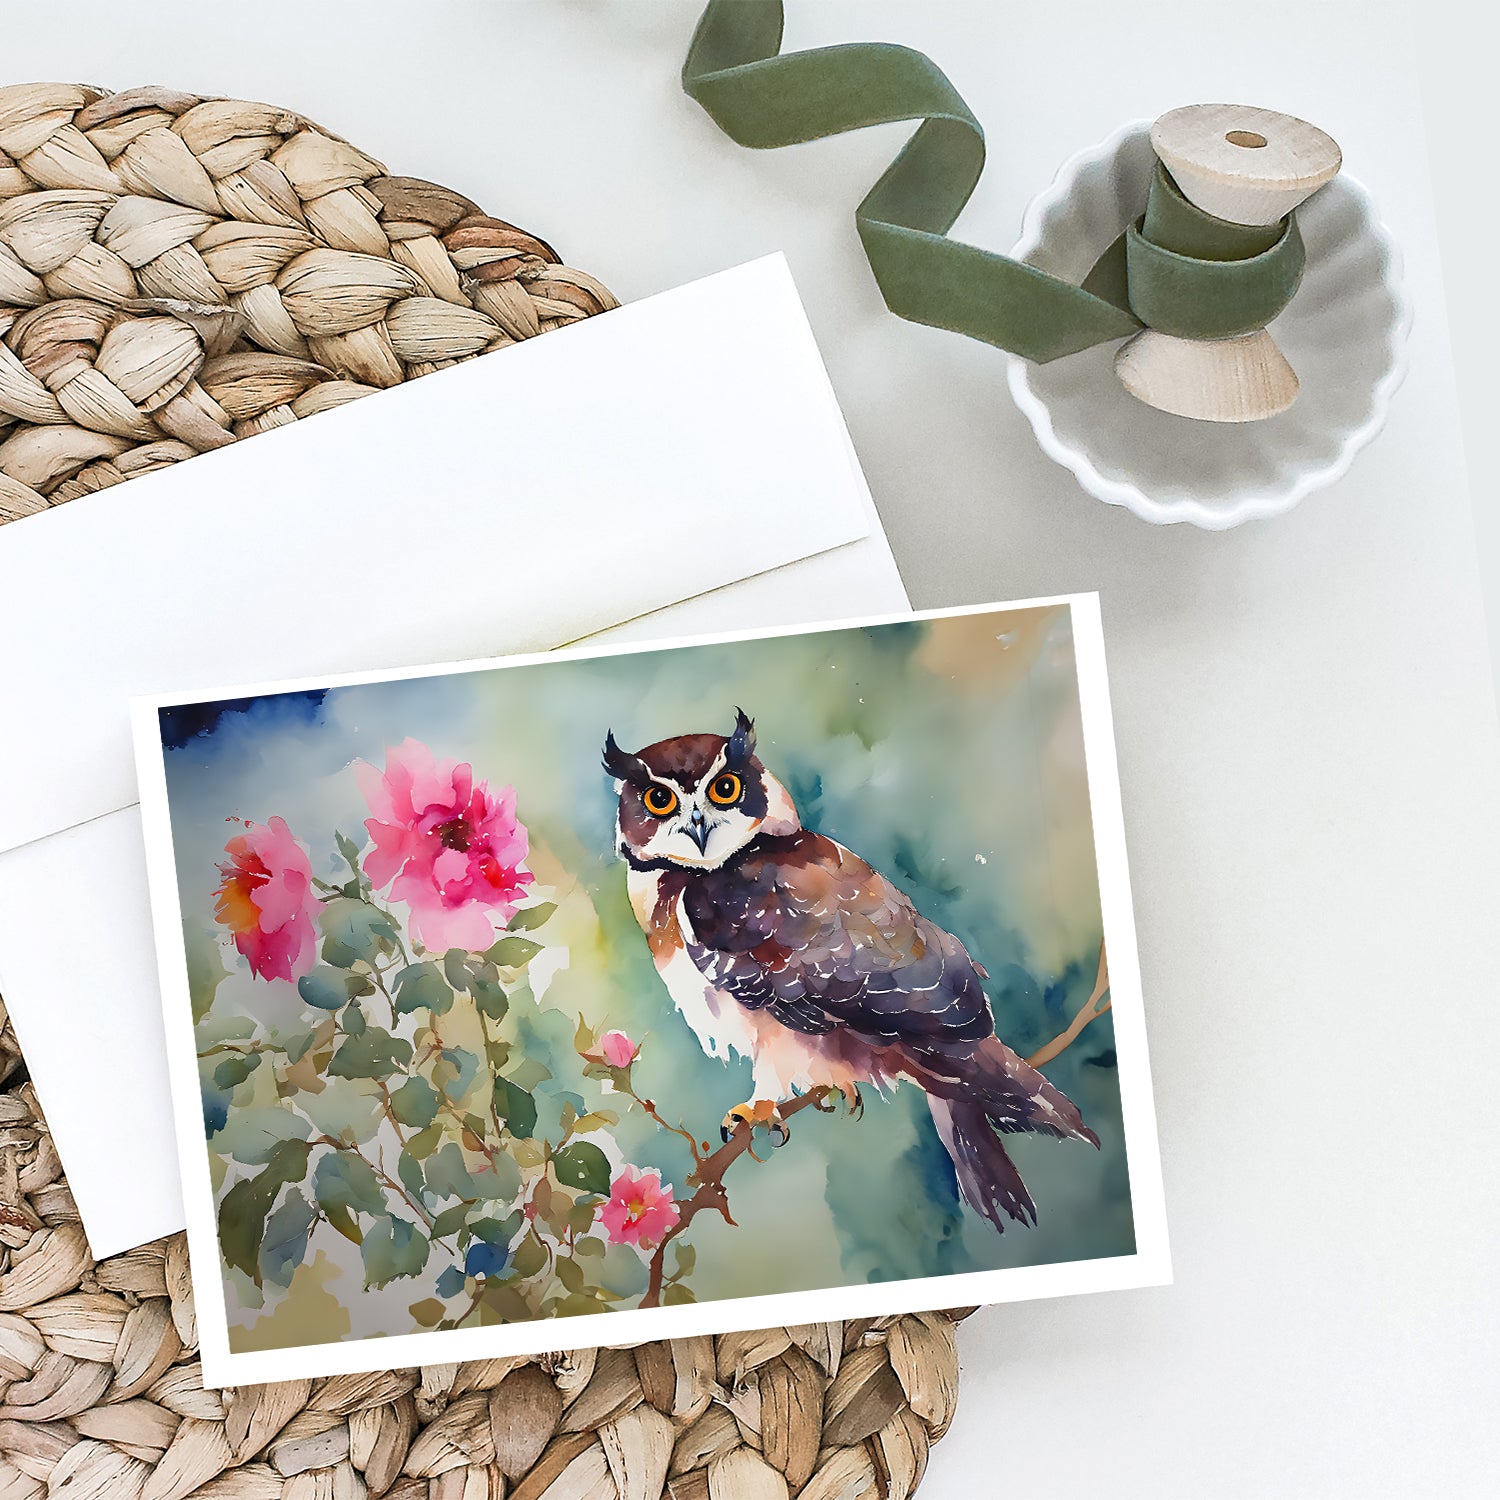 Spectacled Owl Greeting Cards Pack of 8